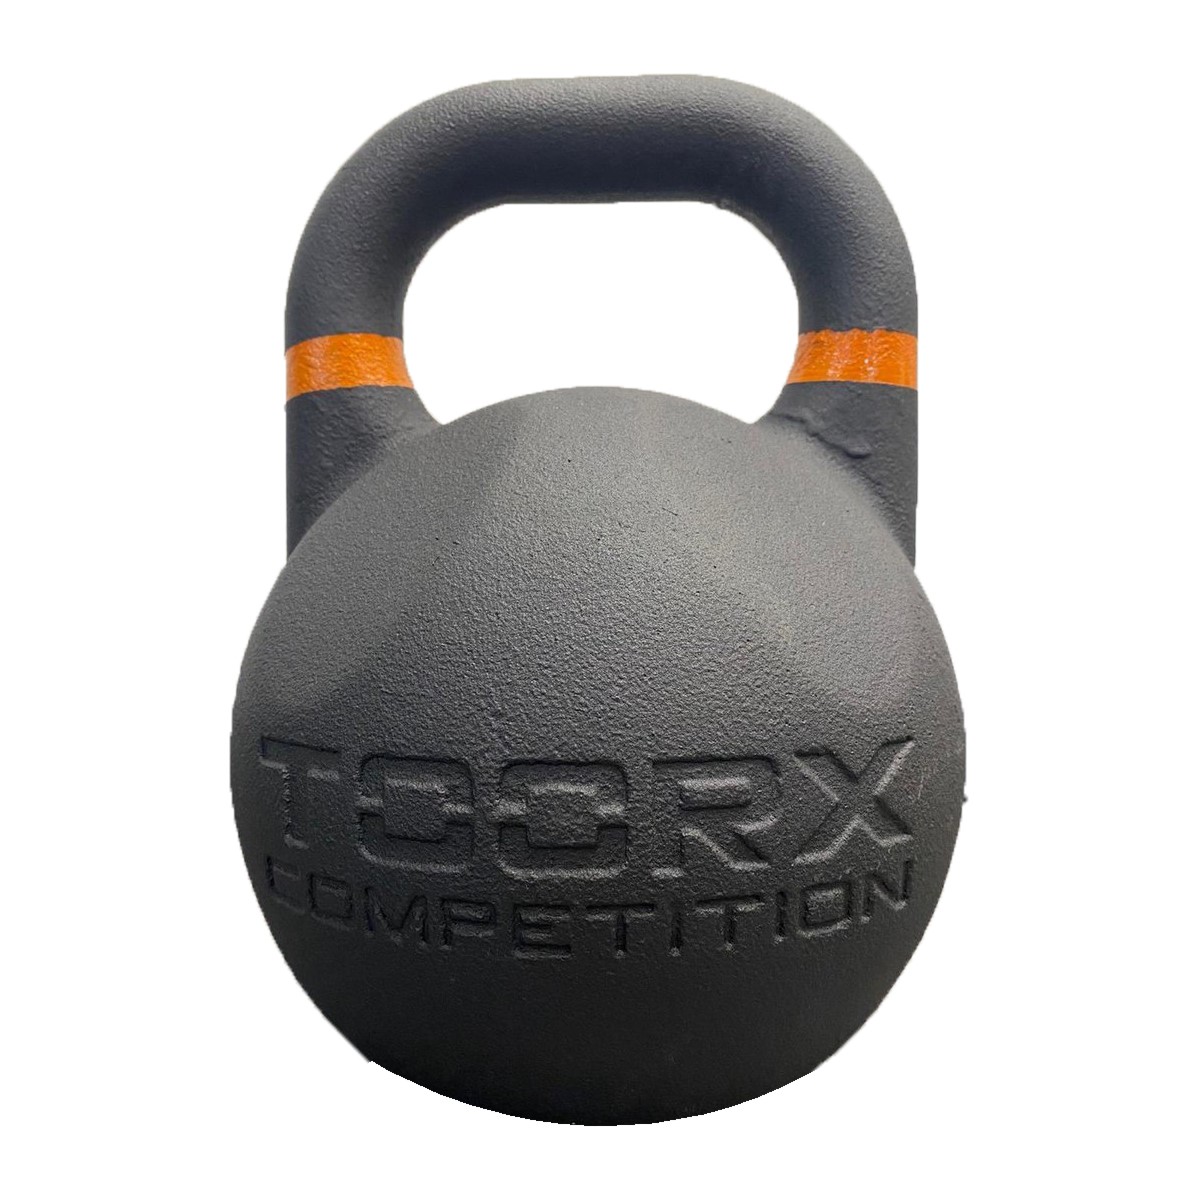 Toorx AKCA Steel Competition Kettlebell - Staal - 8 kg